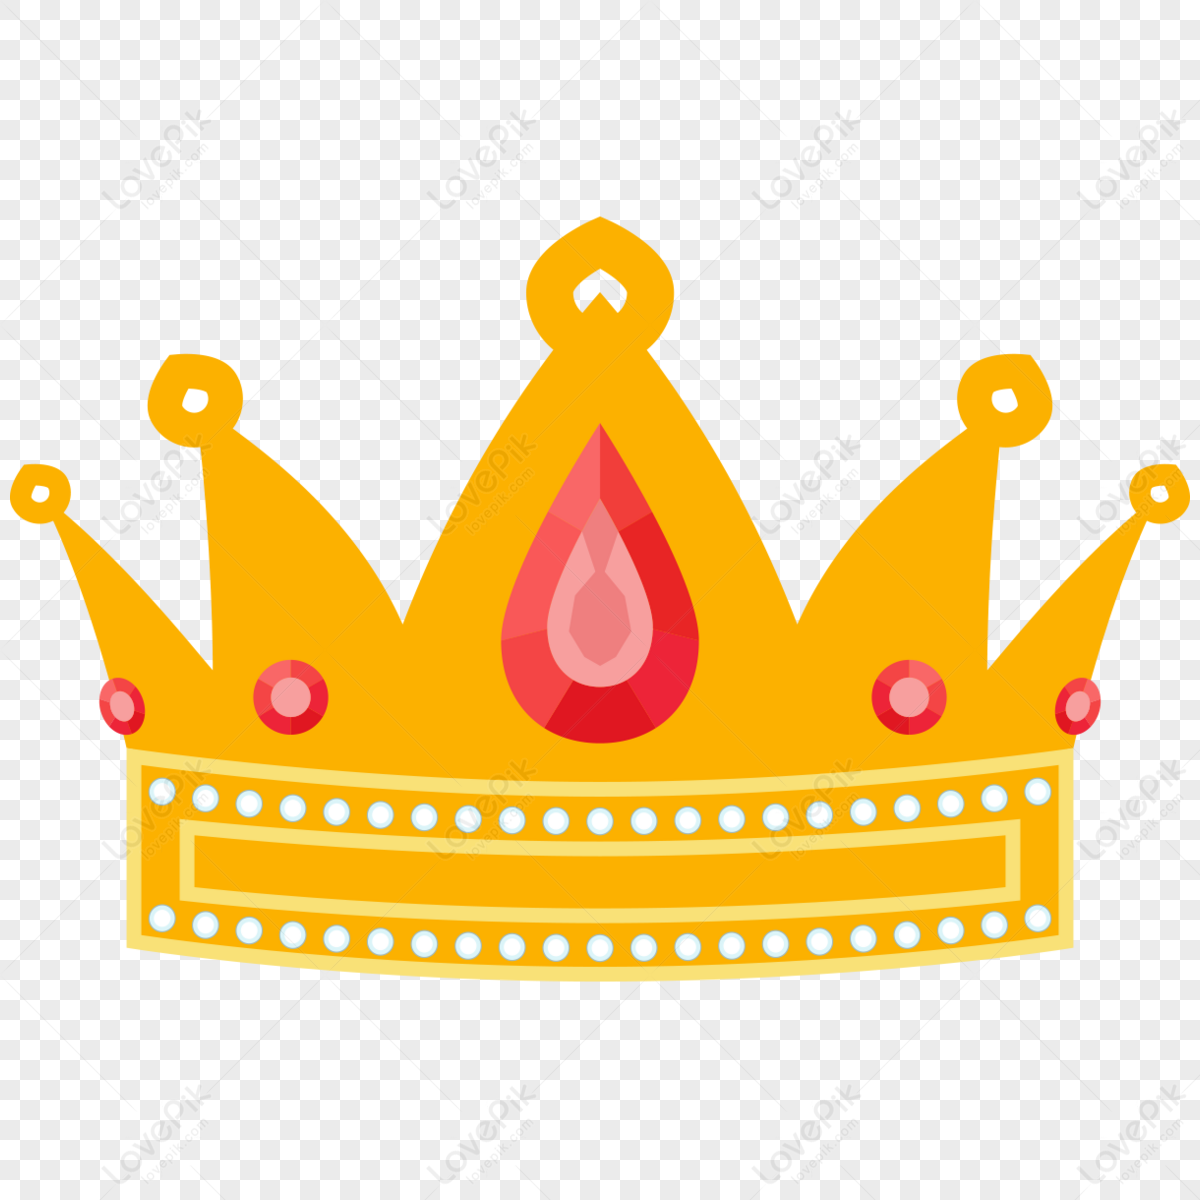 cartoon princess crown vector material,national crown day png transparent background